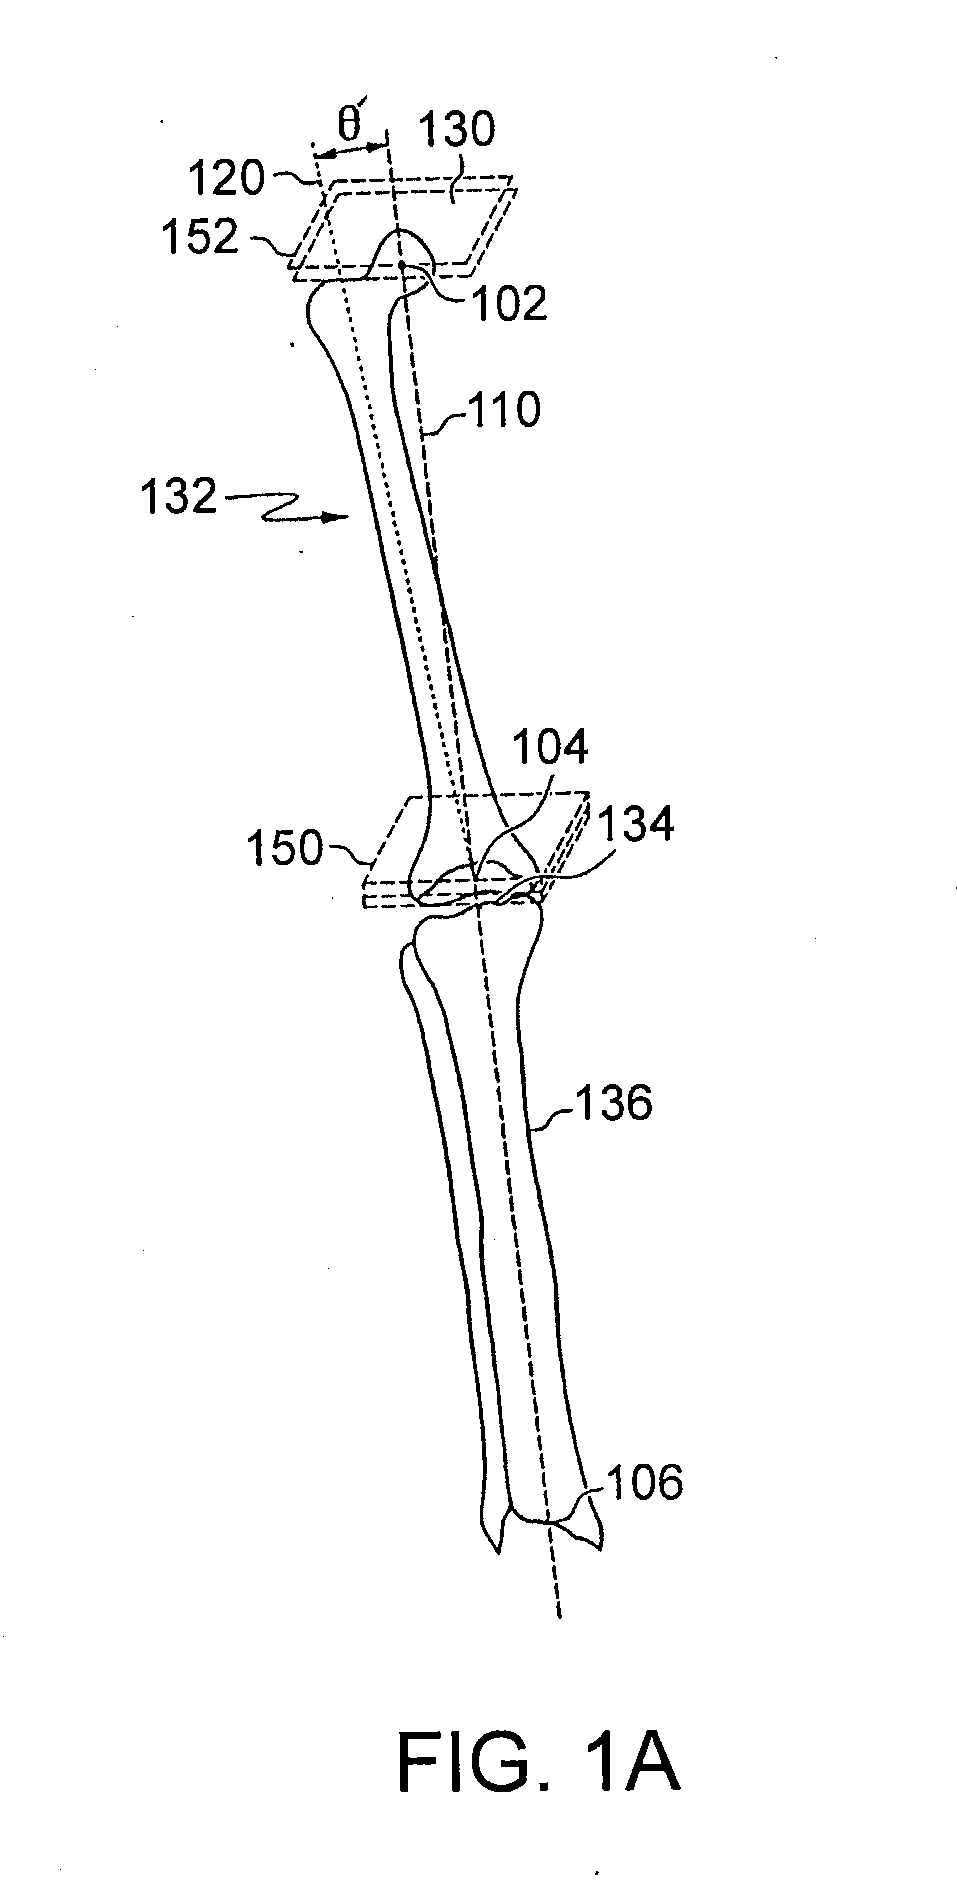 Surgical Tools Facilitating Increased Accuracy, Speed and Simplicity in Performing Joint Arthroplasty